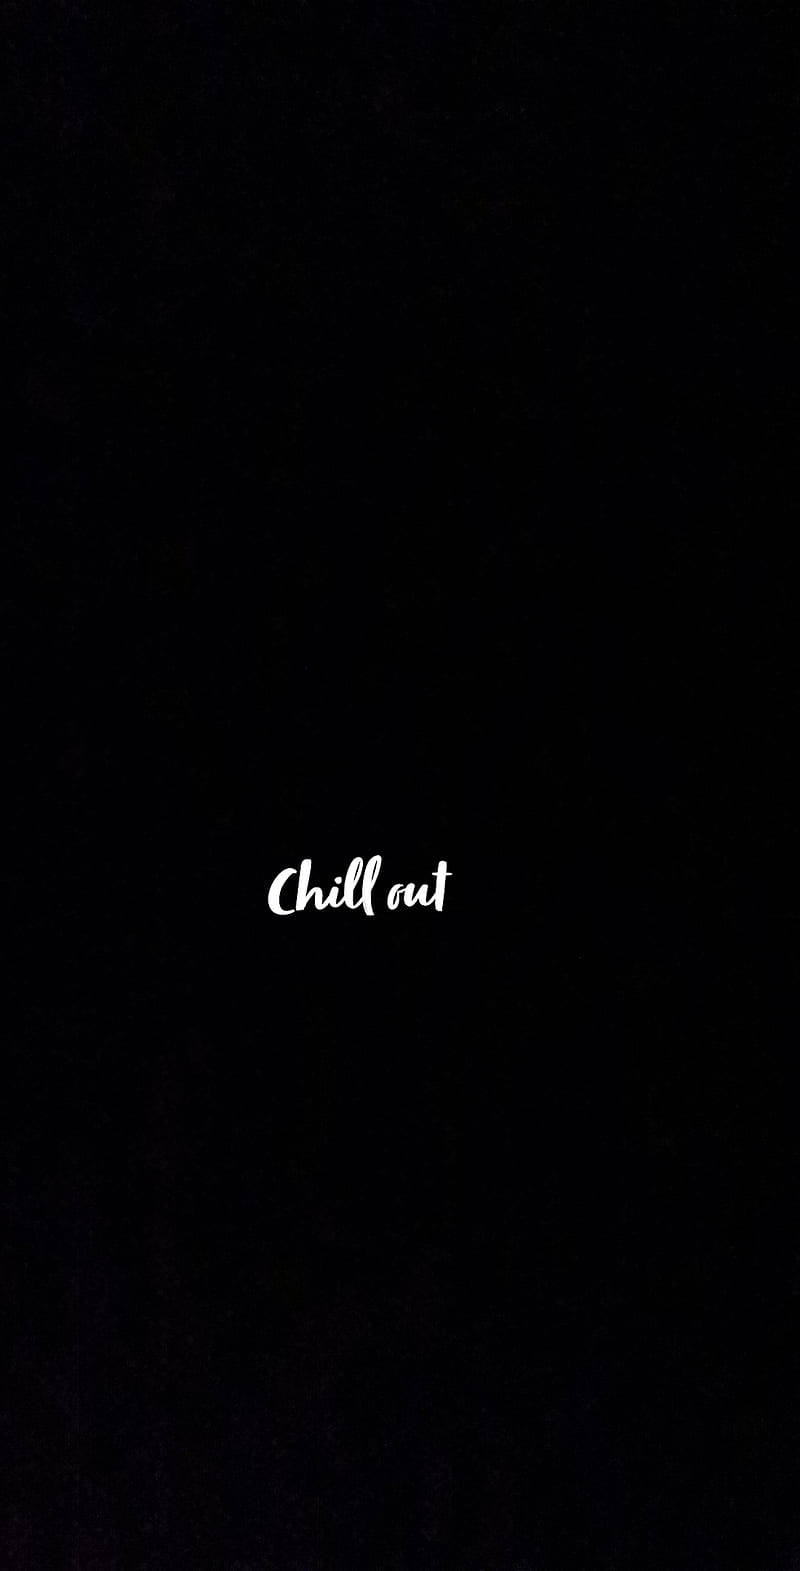 Chill Out Minimalist Lettering Wallpaper